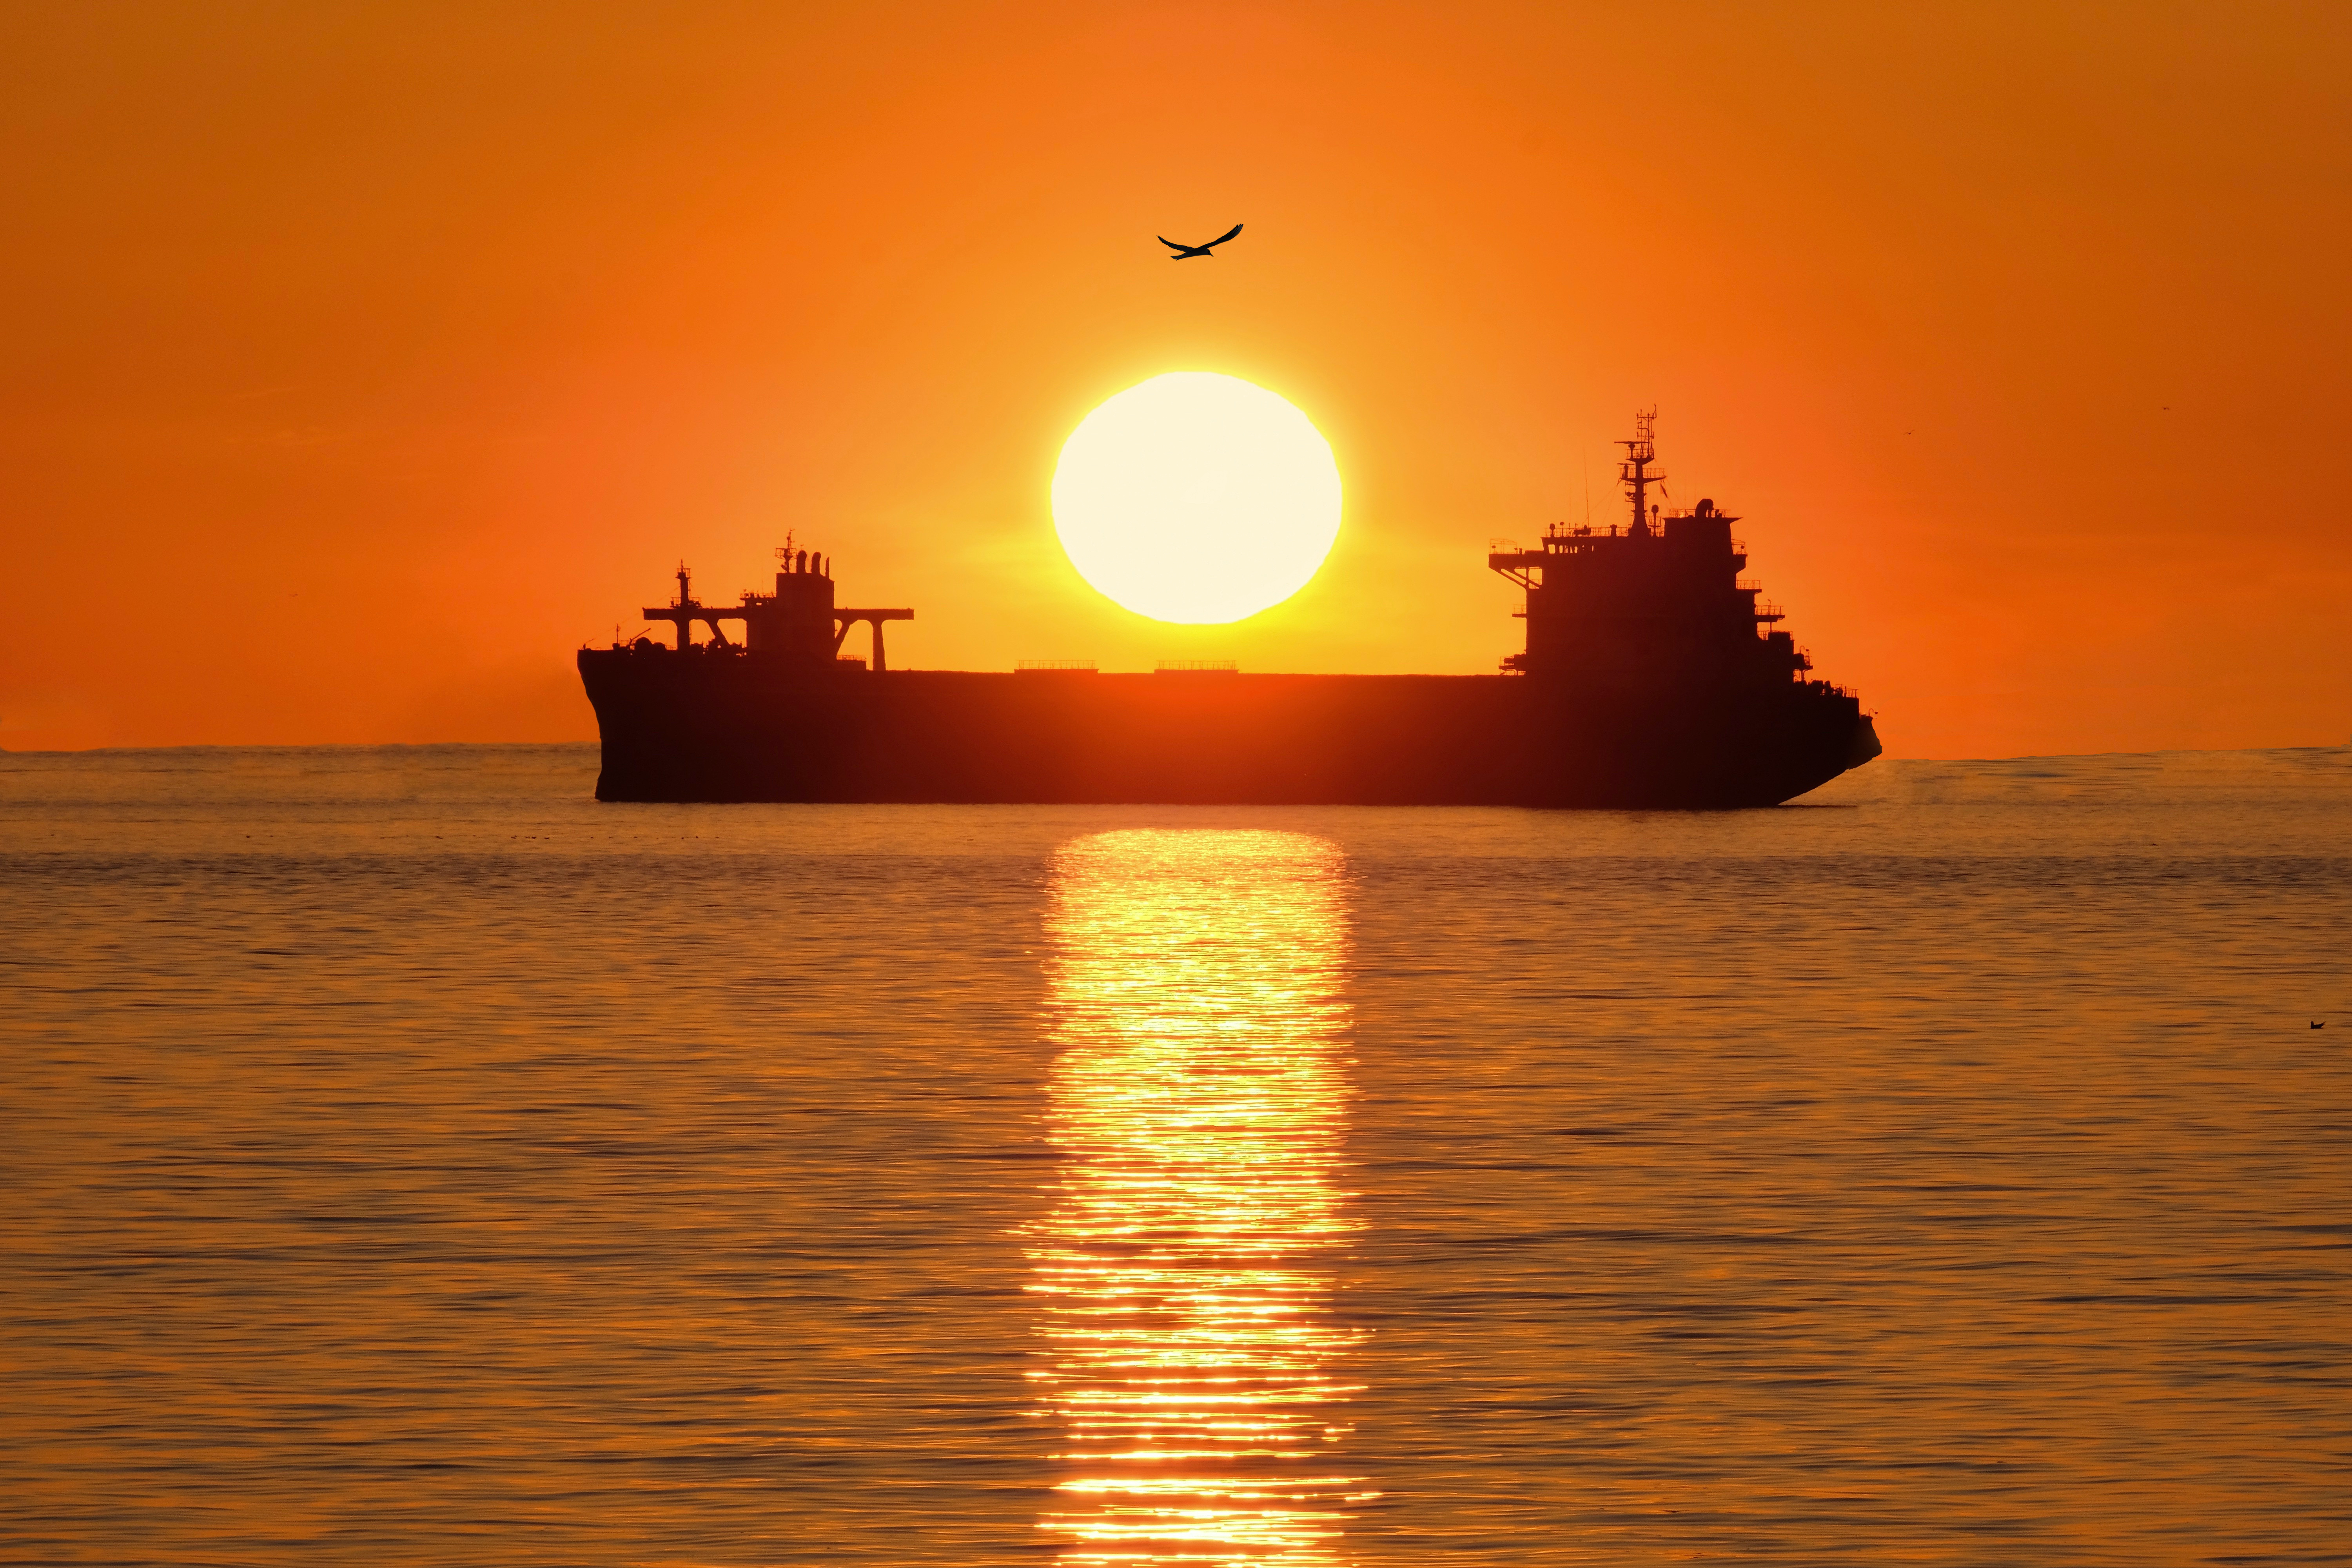 Transport ship on ocean at sunset, with bird flying over.